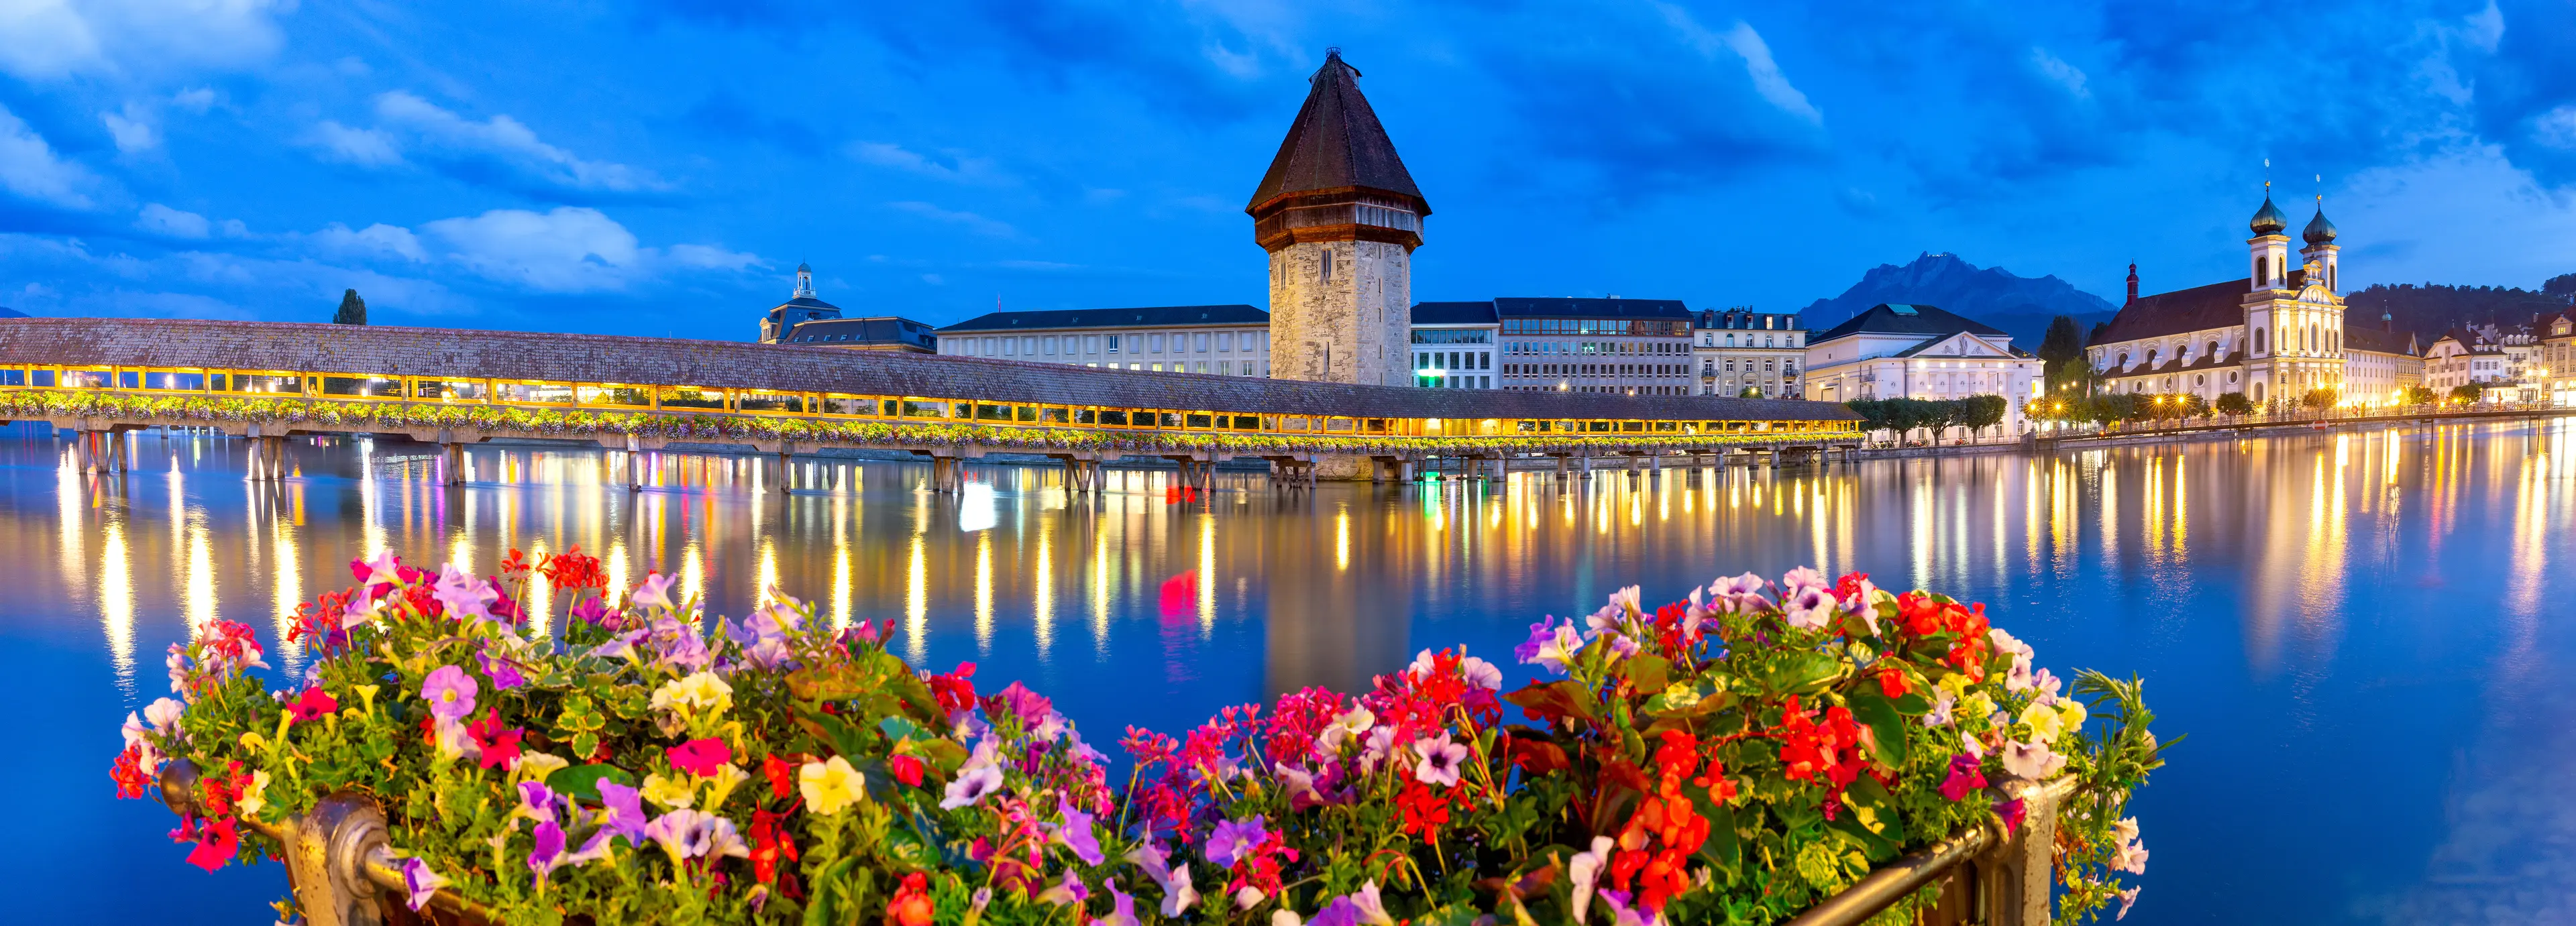 1-Day Romantic Relaxation & Sightseeing Tour in Lucerne